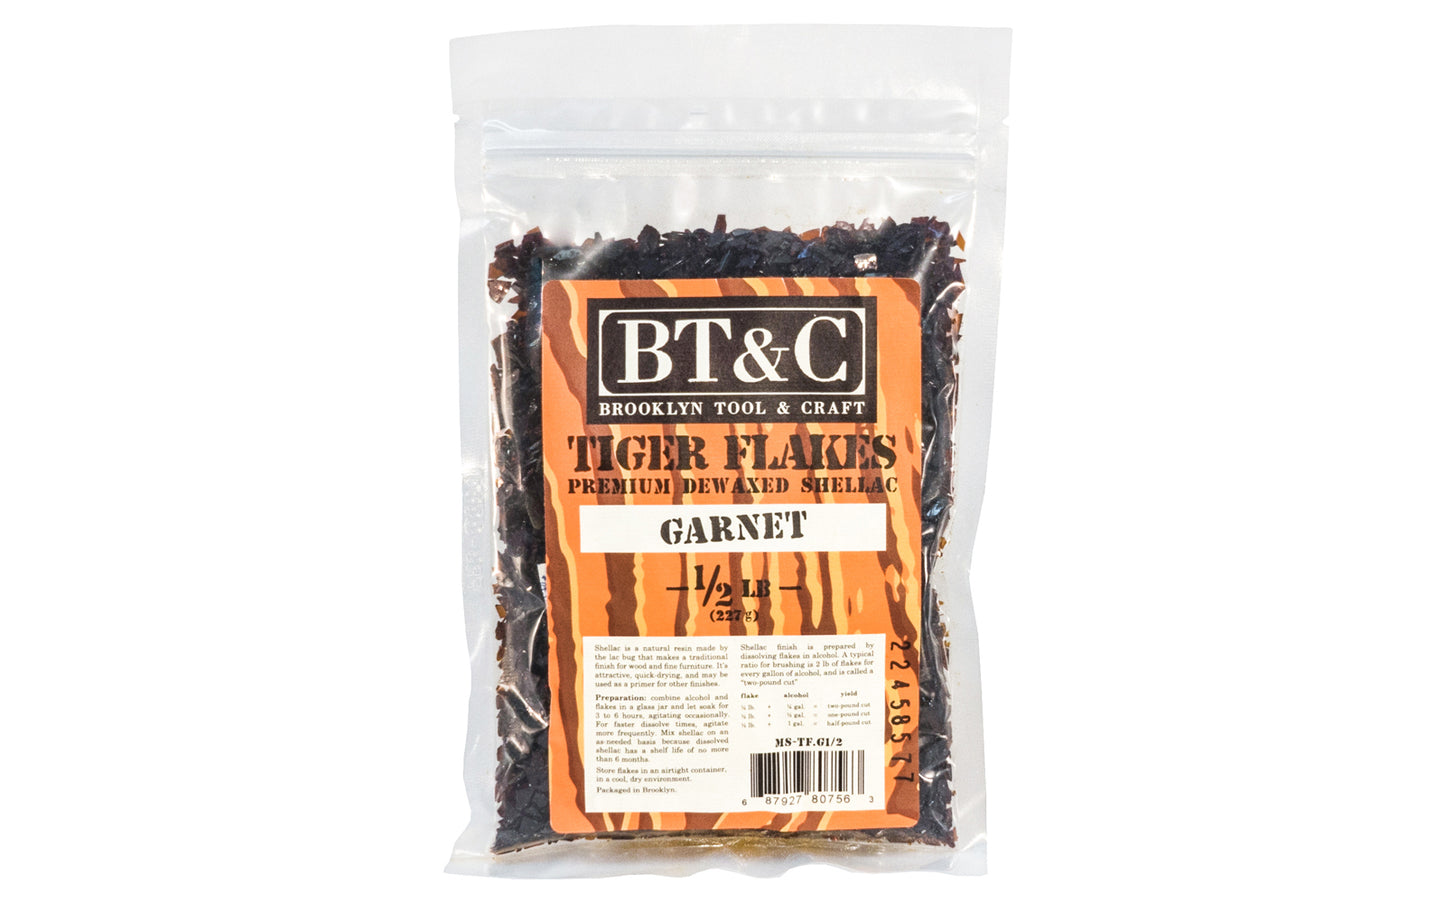 Dewaxed Garnet Shellac Tiger Flakes - 1/2 lb Bag  - Refined in Germany - Great for French Polishing - Makes a beautiful finish for wood, cork, plaster, & metal - Garnet Flakes